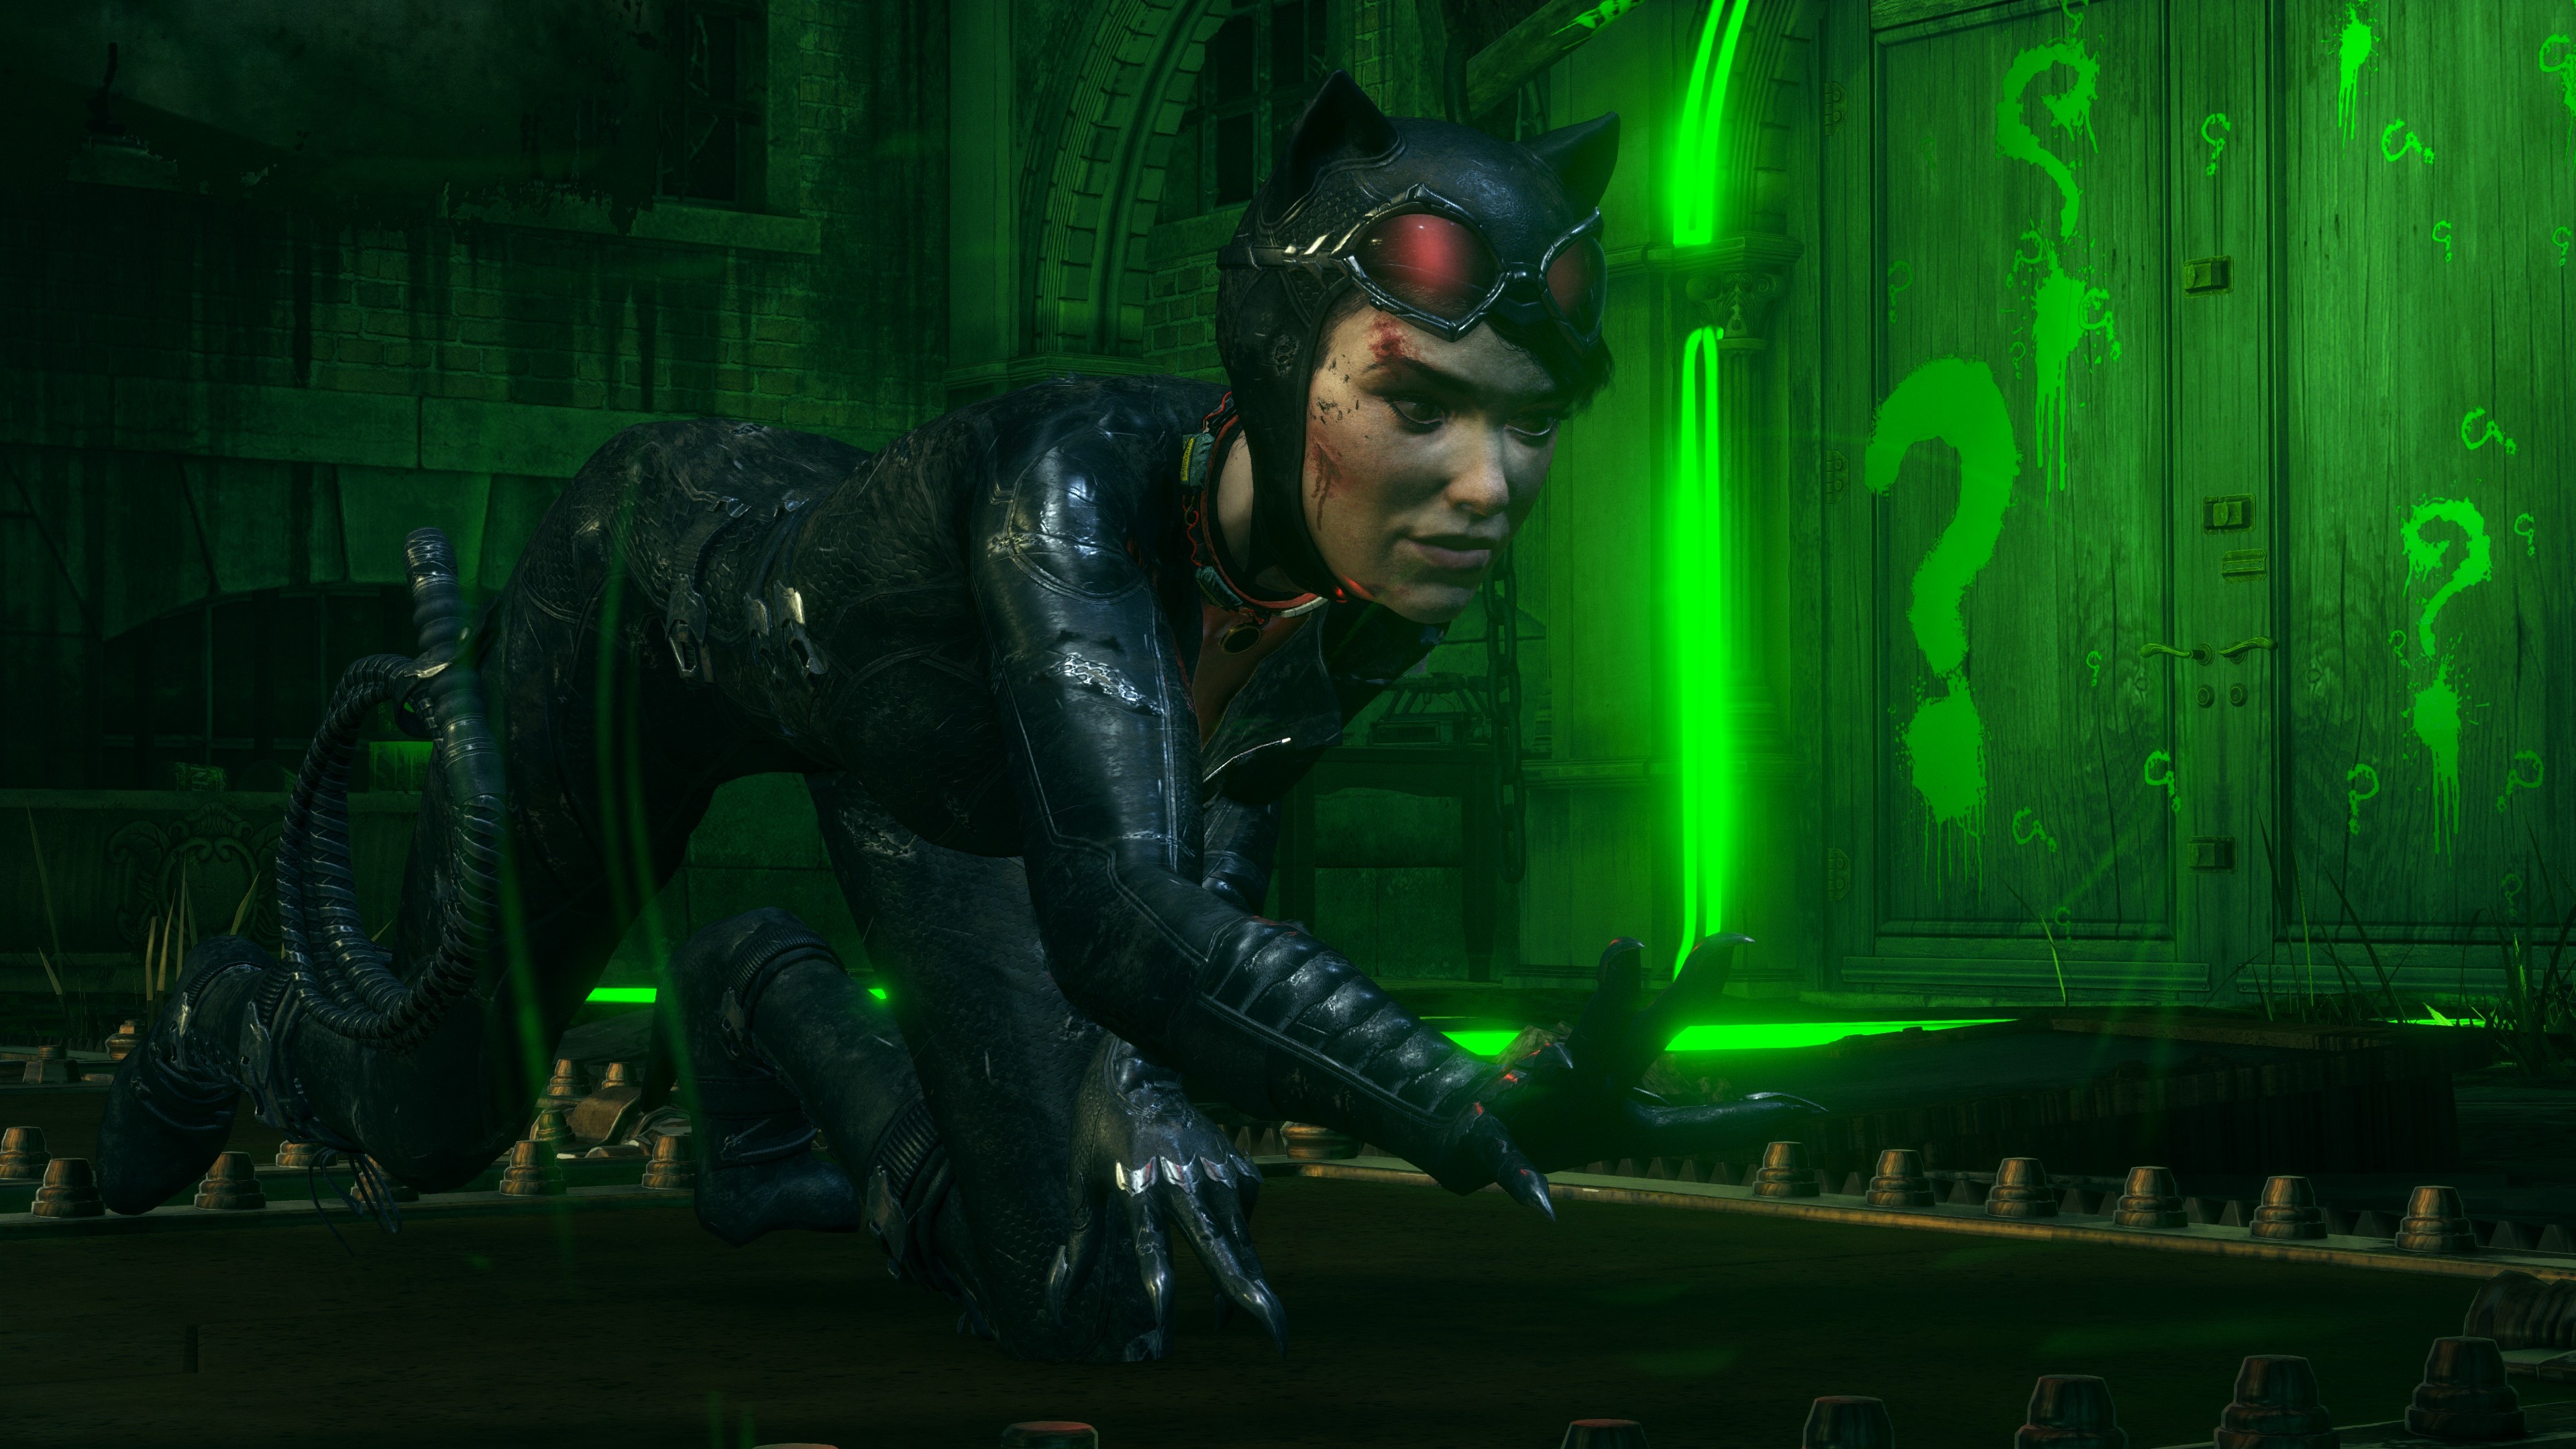 Catwoman: Gotham City burglar who usually wears a tight, one-piece outfit and uses a bullwhip for a weapon. 3840x2160 4K Background.